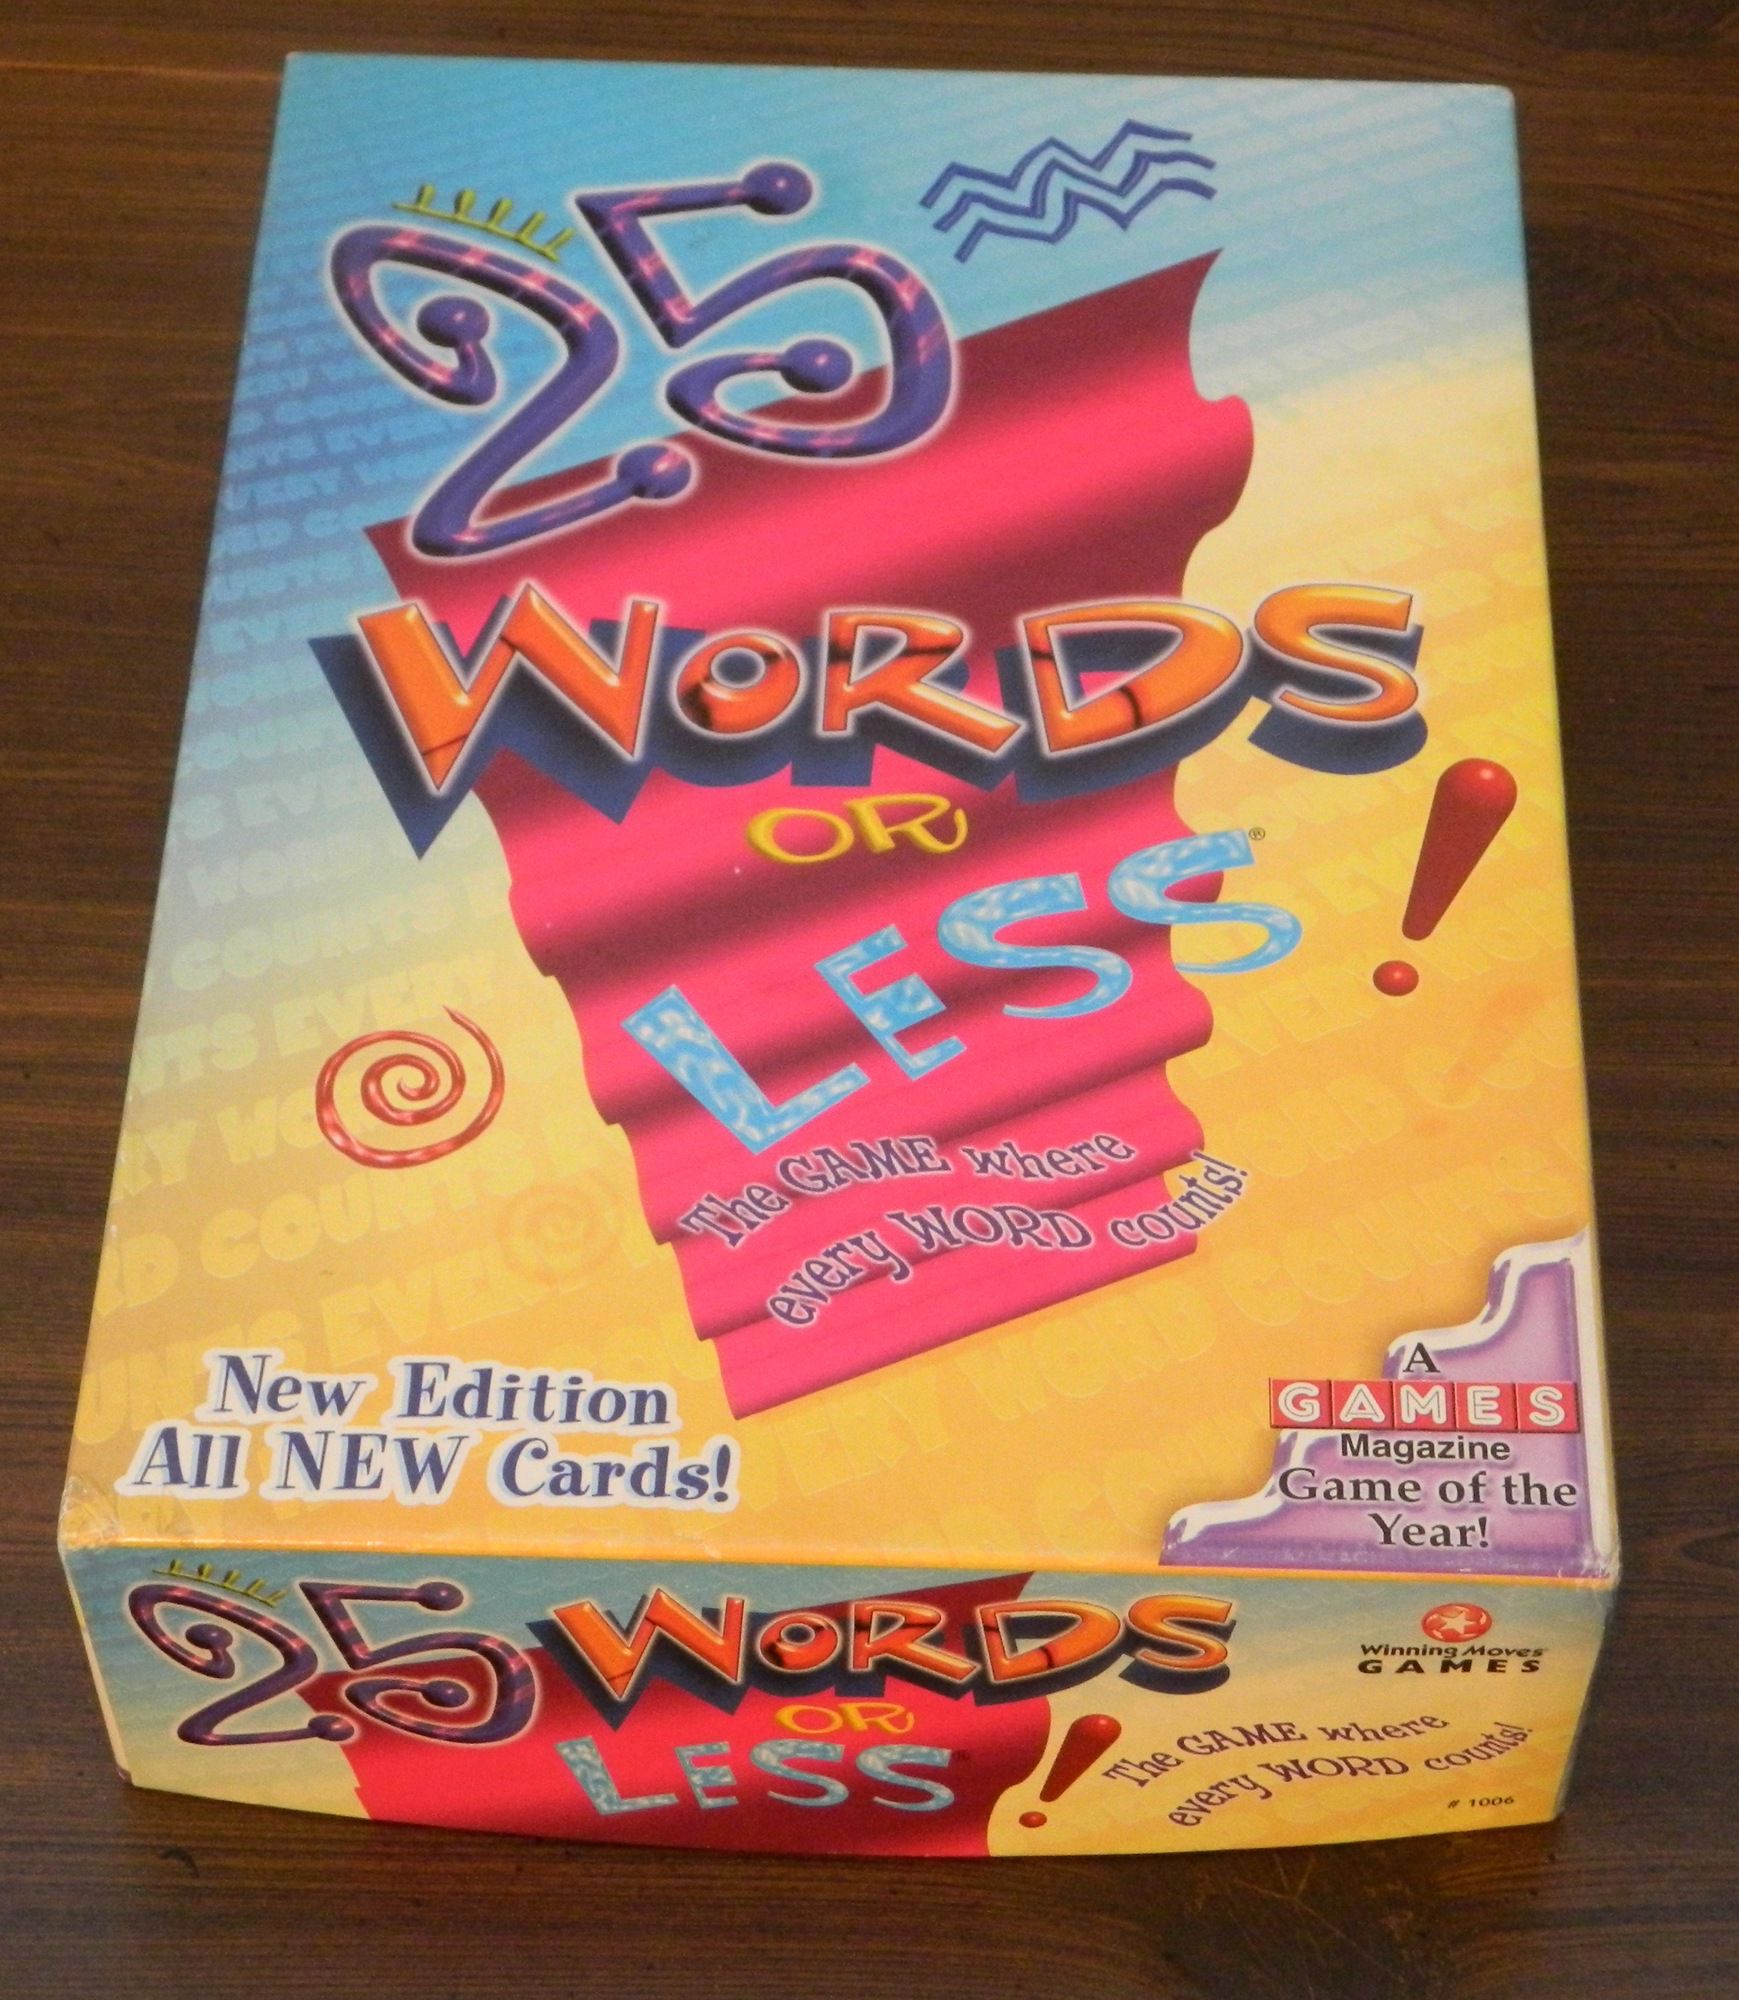 Box for 25 Words or Less